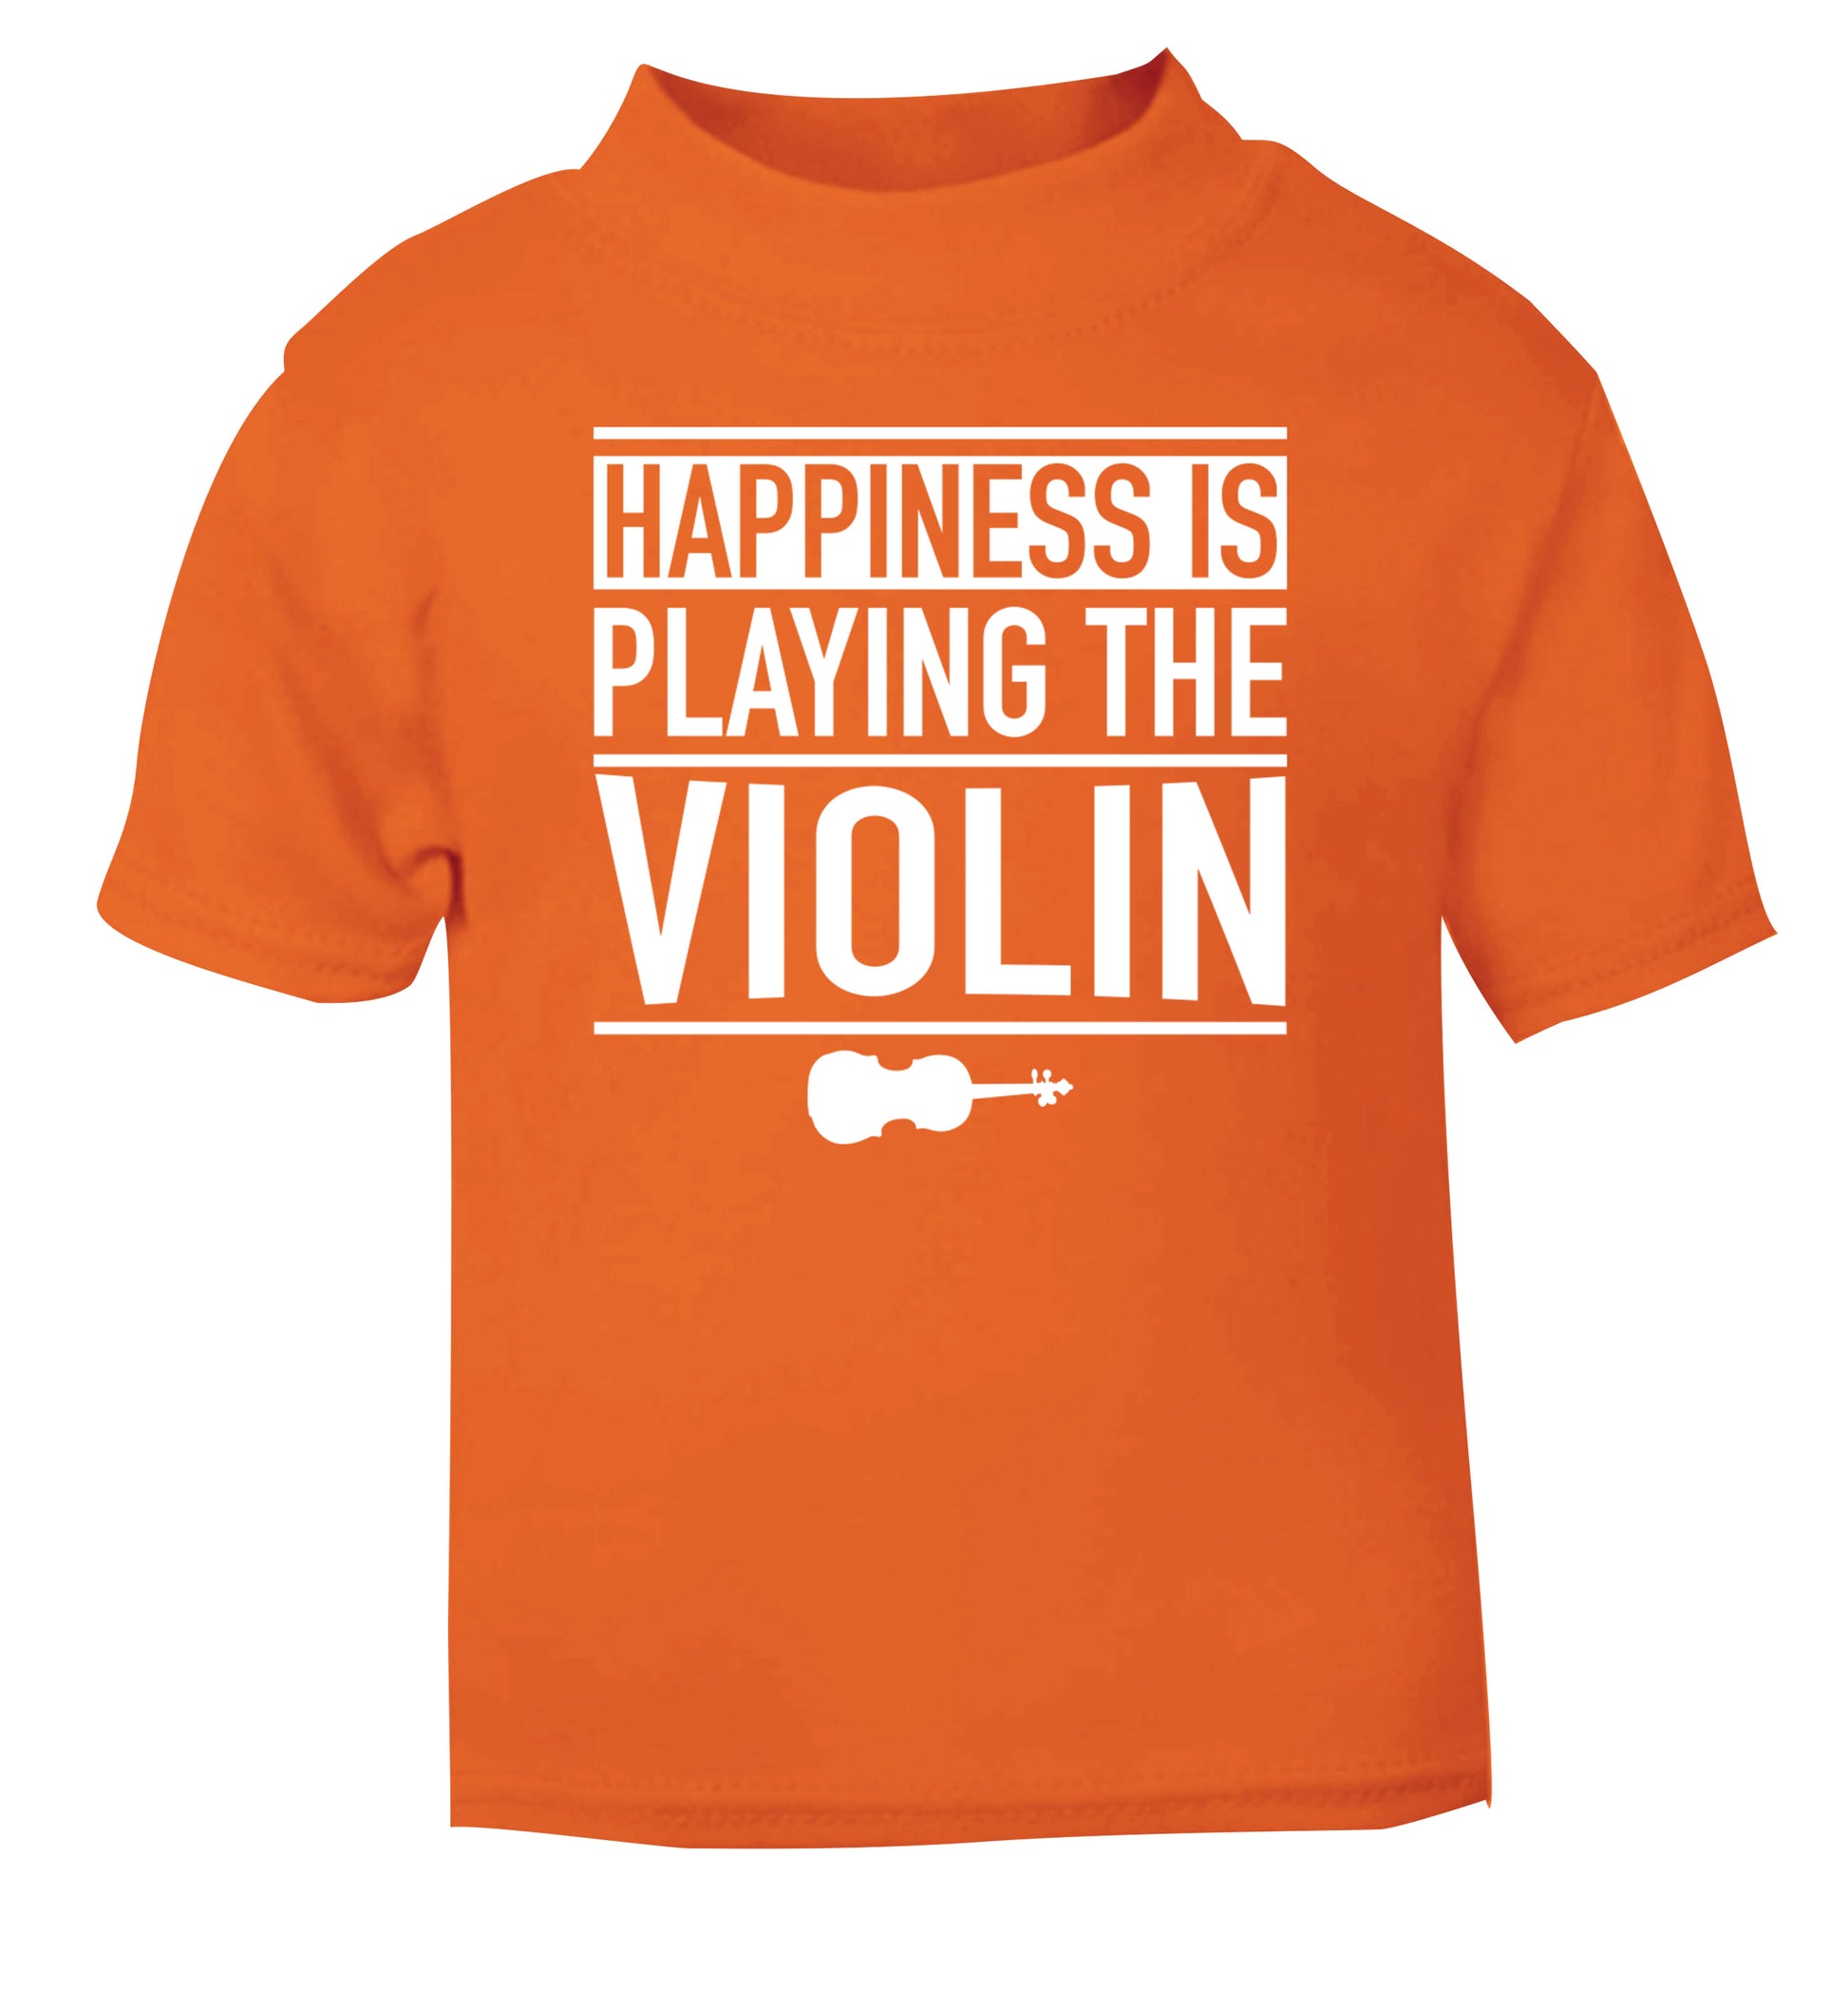 Happiness is playing the violin orange Baby Toddler Tshirt 2 Years